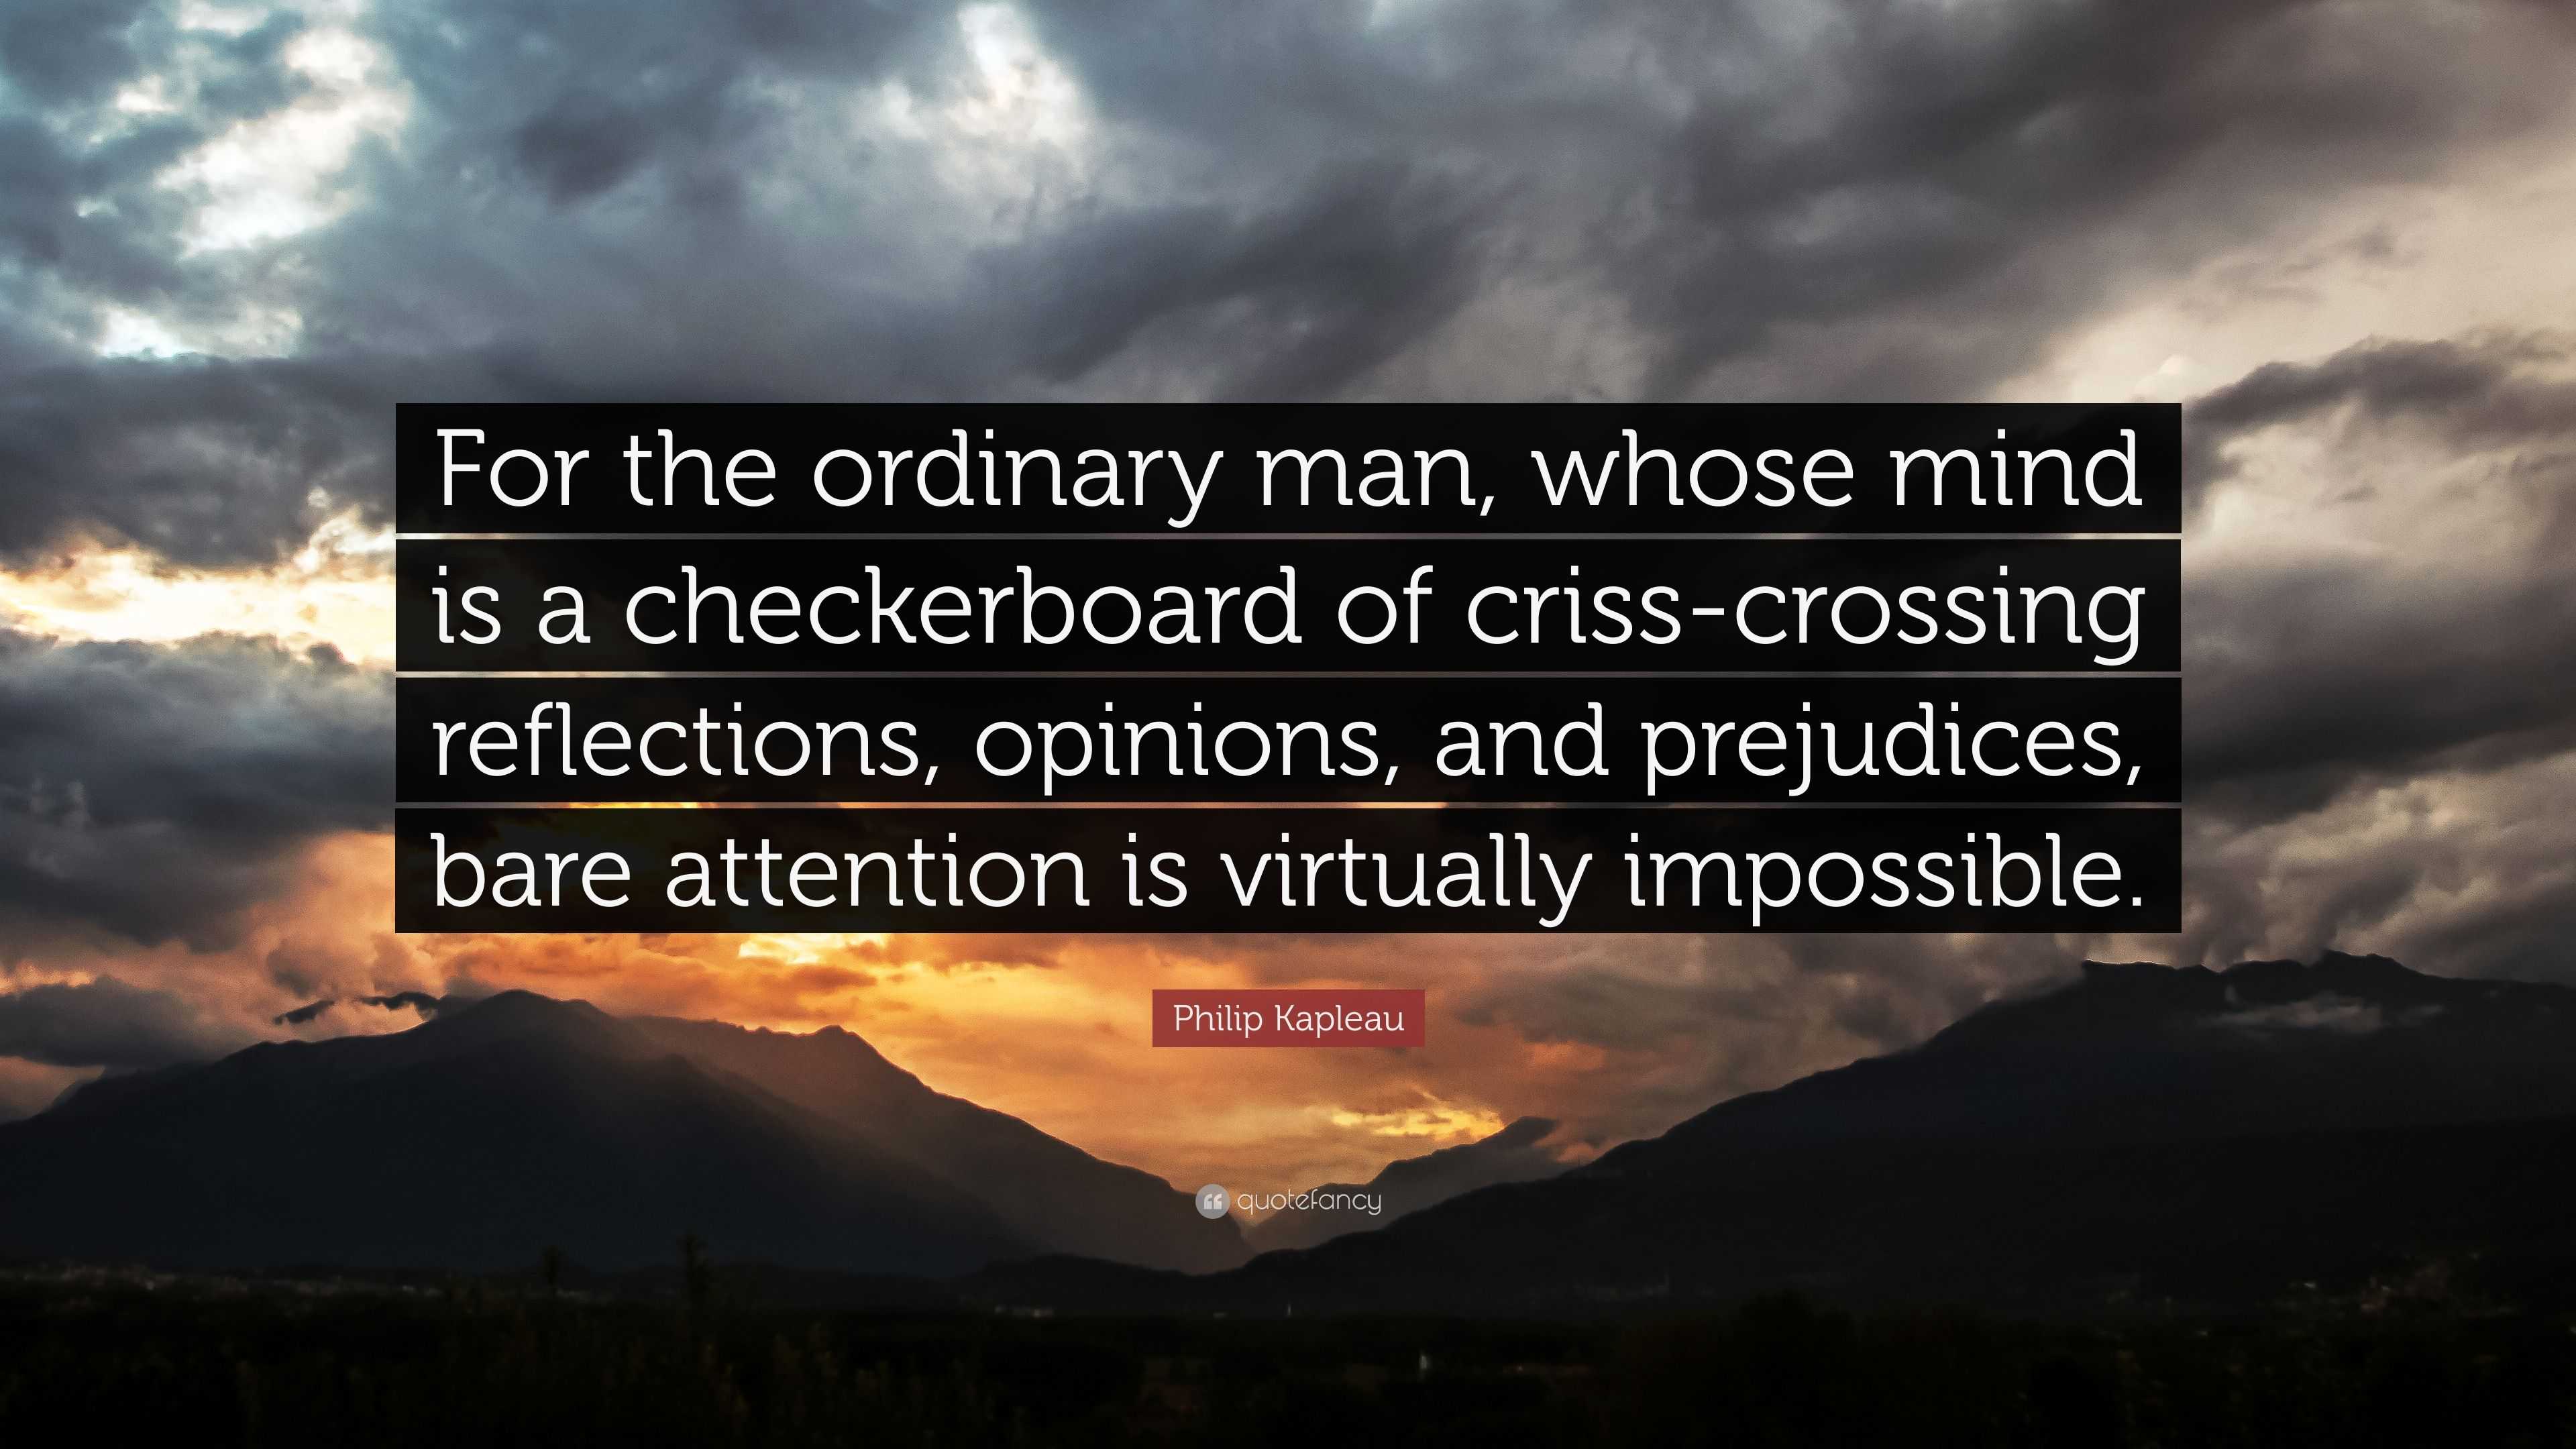 10 Mindf*cked Quotes from The Way of the Superior Man, by Aure's Notes, ILLUMINATION